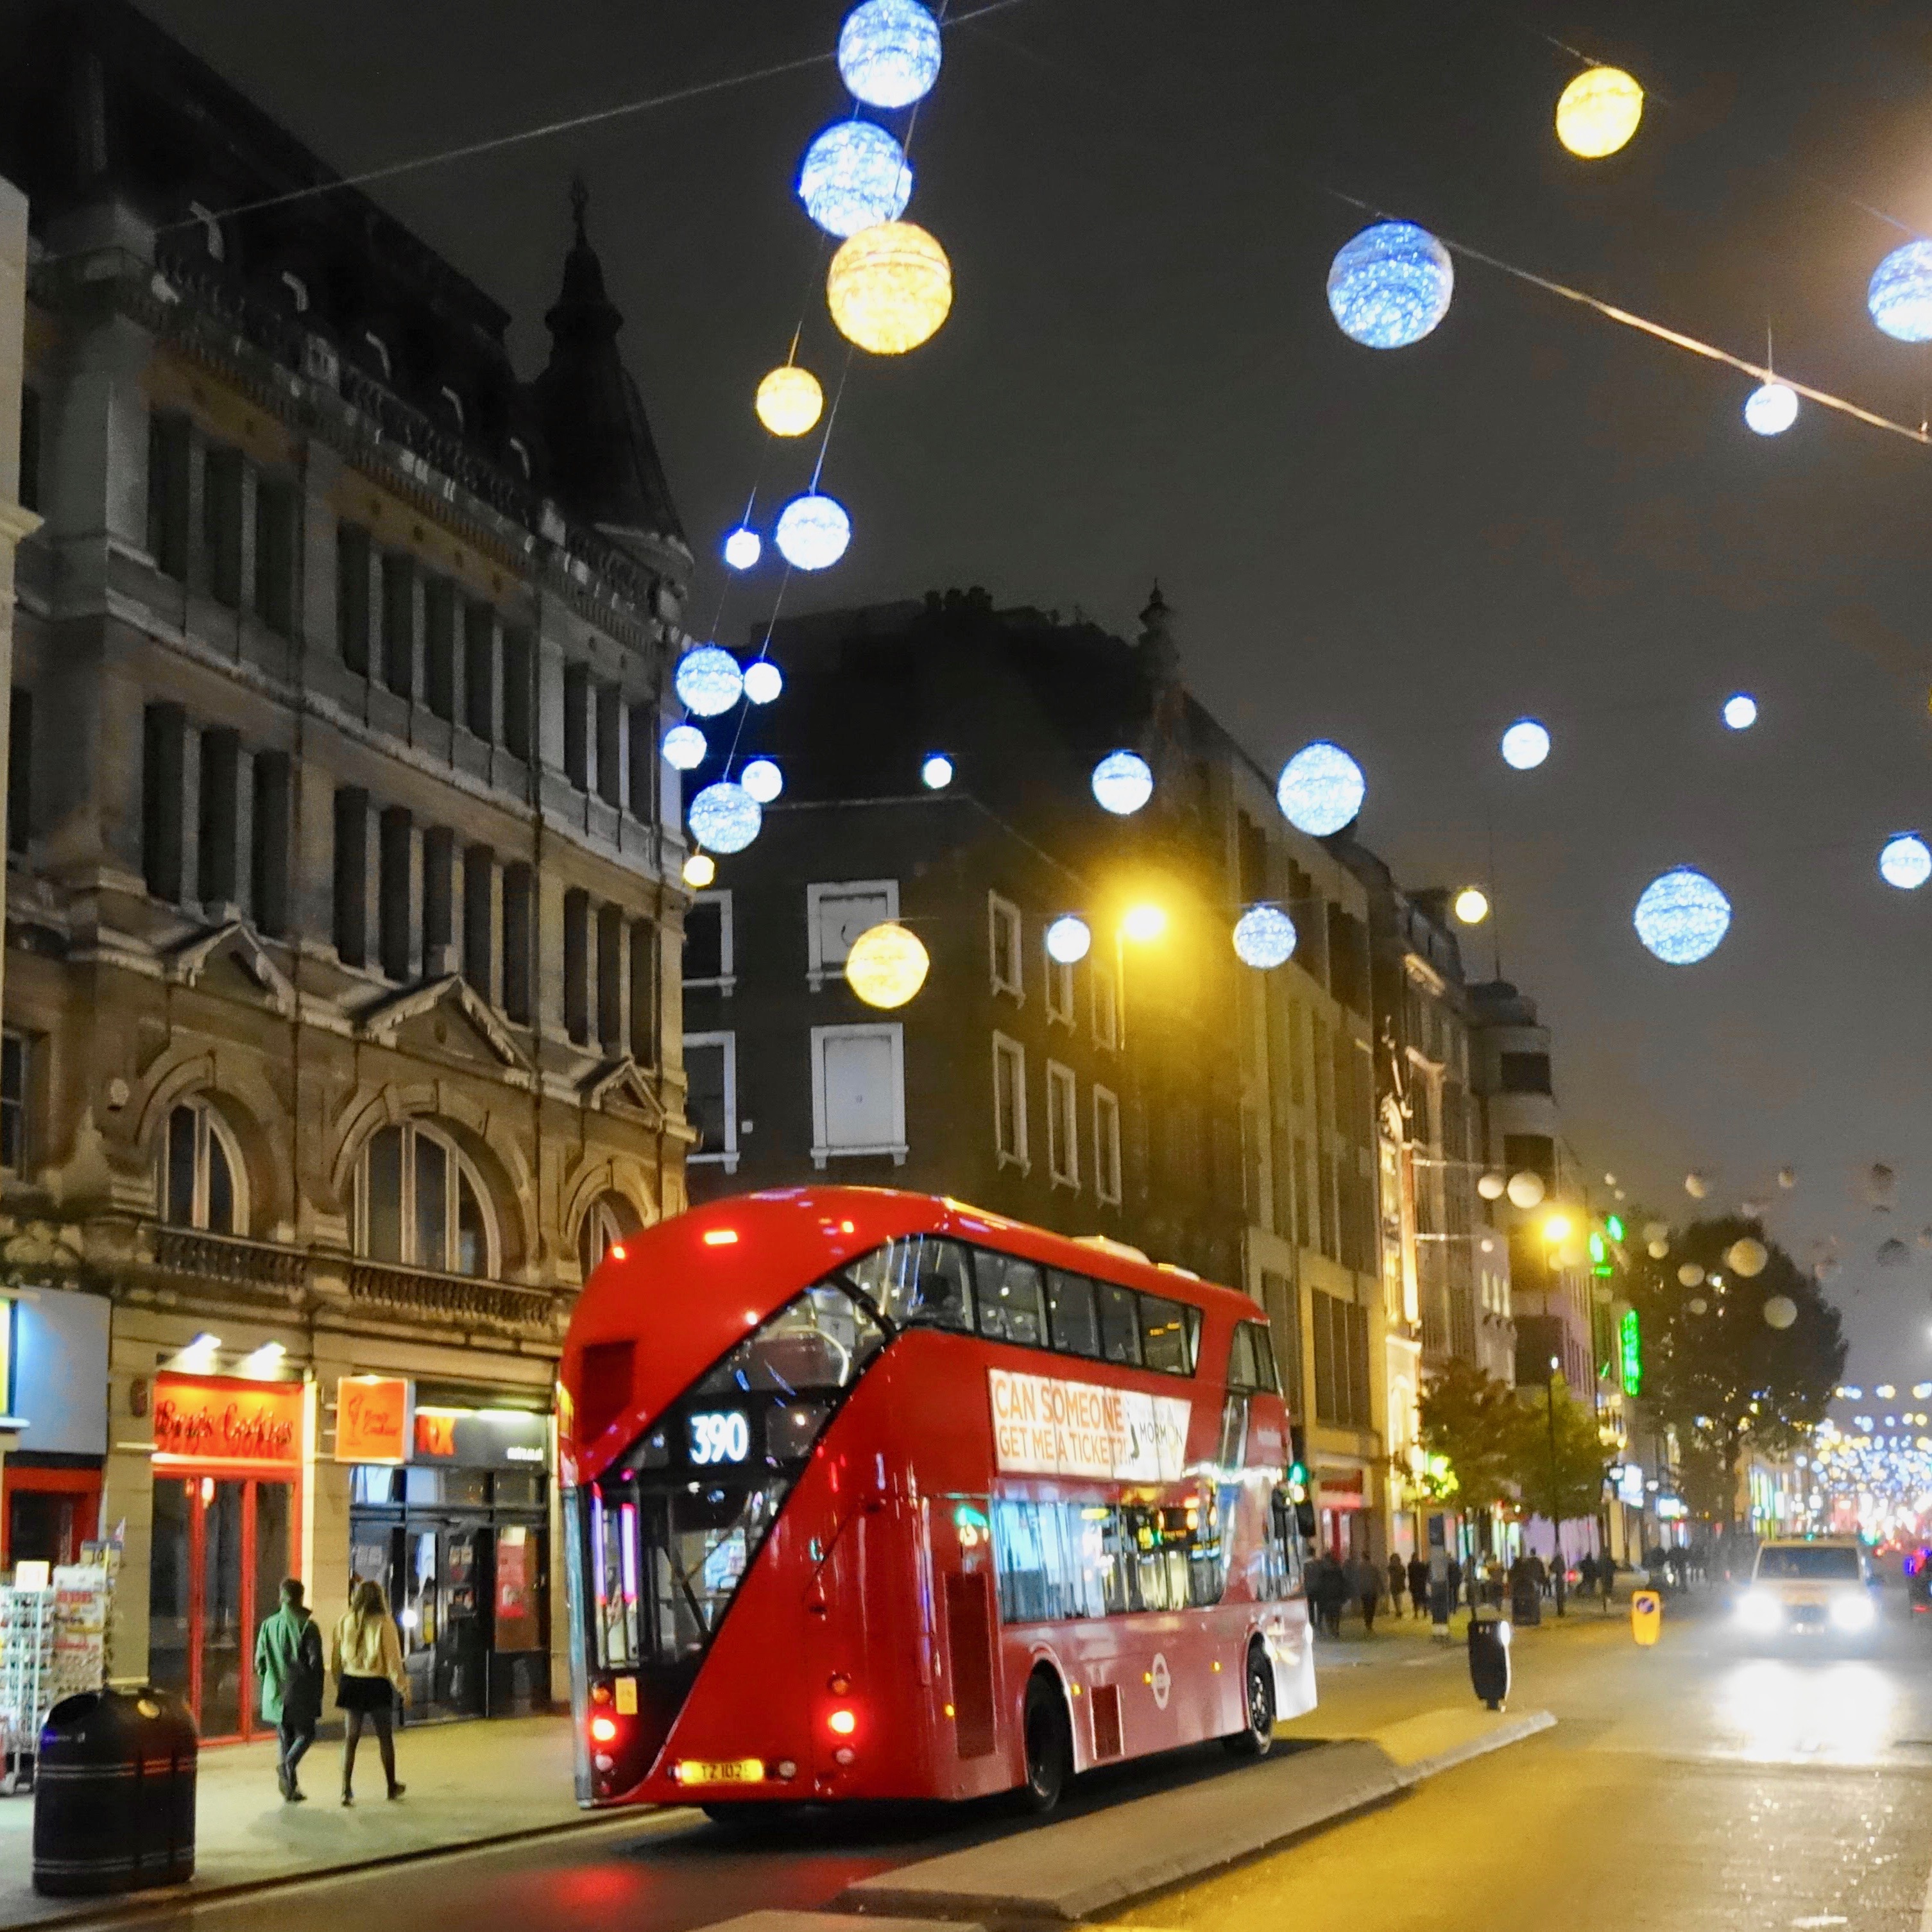 A modern version of a London double decker bus waits for passengers on a quiet street at night.  Holiday lanterns flow across the street high above shining blue tones as a few people walk down the sidewalk. 